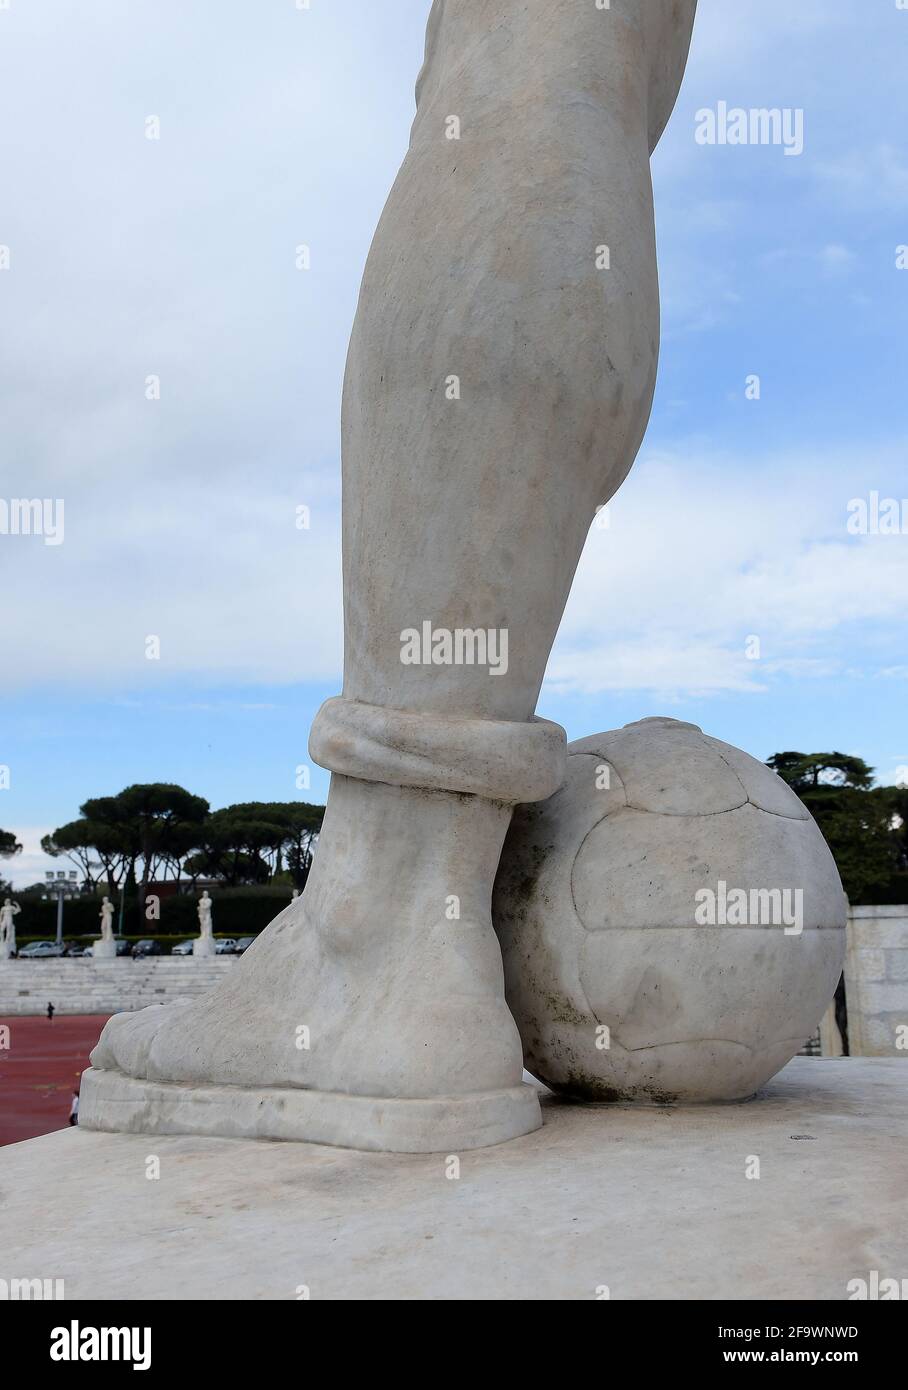 Marble statue of a footballer in the Stadium of the marbles (Stadio dei Marmi) in the Foro Italico, a sport complex in Rome, Italy on April 20, 2021. This stadium was inaugurated in 1932 by Benito Mussolini. It has Carrara marble steps lined by 64 marble statues of athletes in classical style. European football has been plunged into unprecedented crisis and division with the announcement of a much-dreaded breakaway Super League. Photo by Eric Vandeville/ABACAPRESS.COM Stock Photo